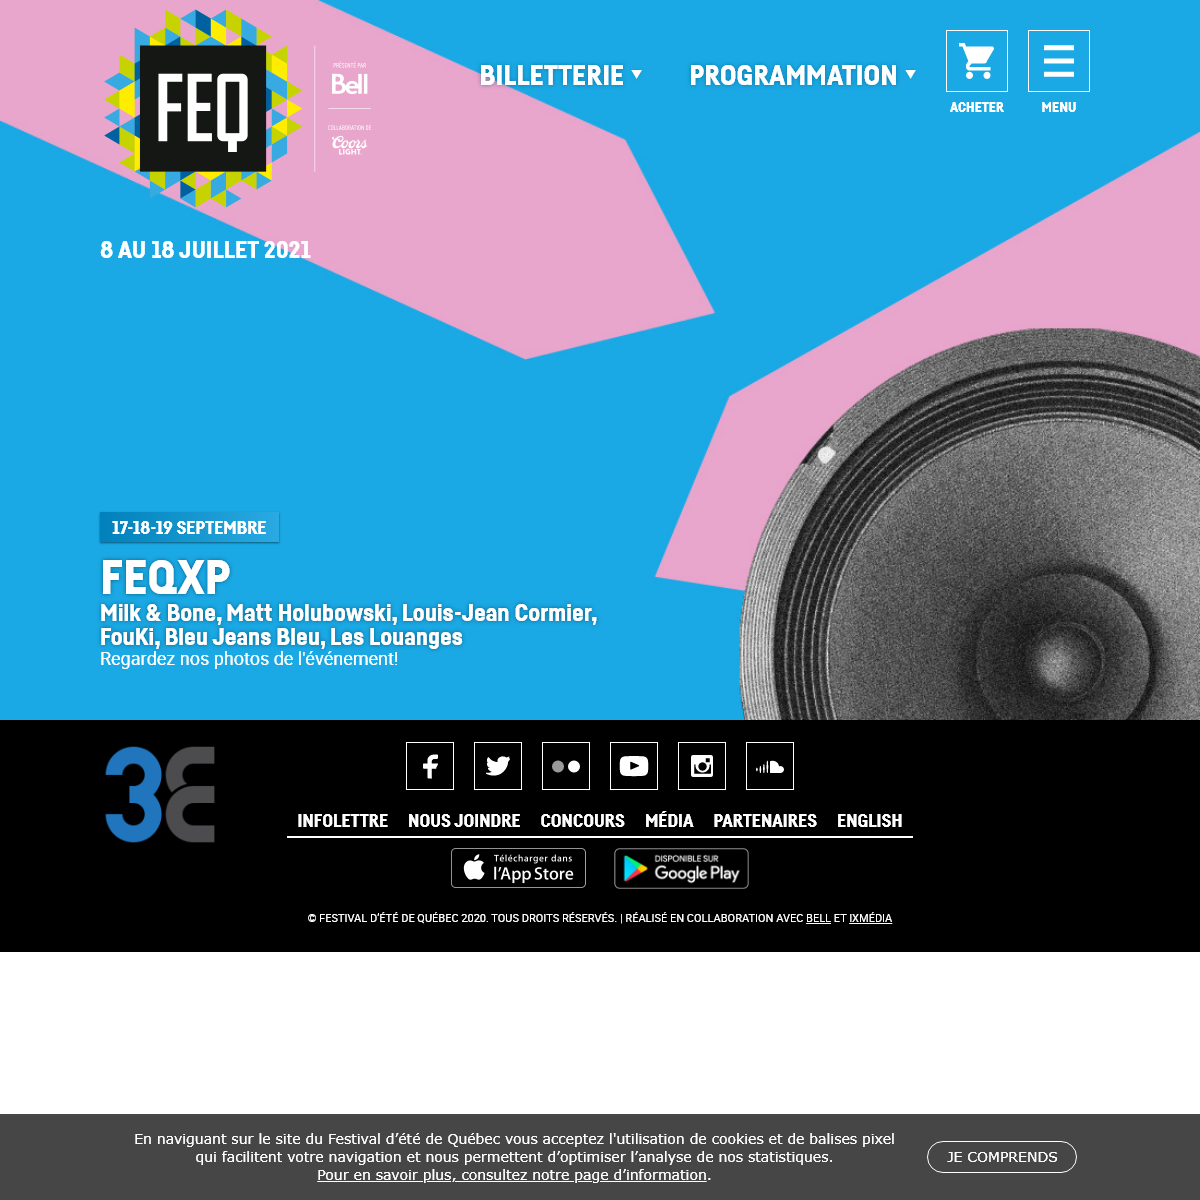 A complete backup of feq.ca